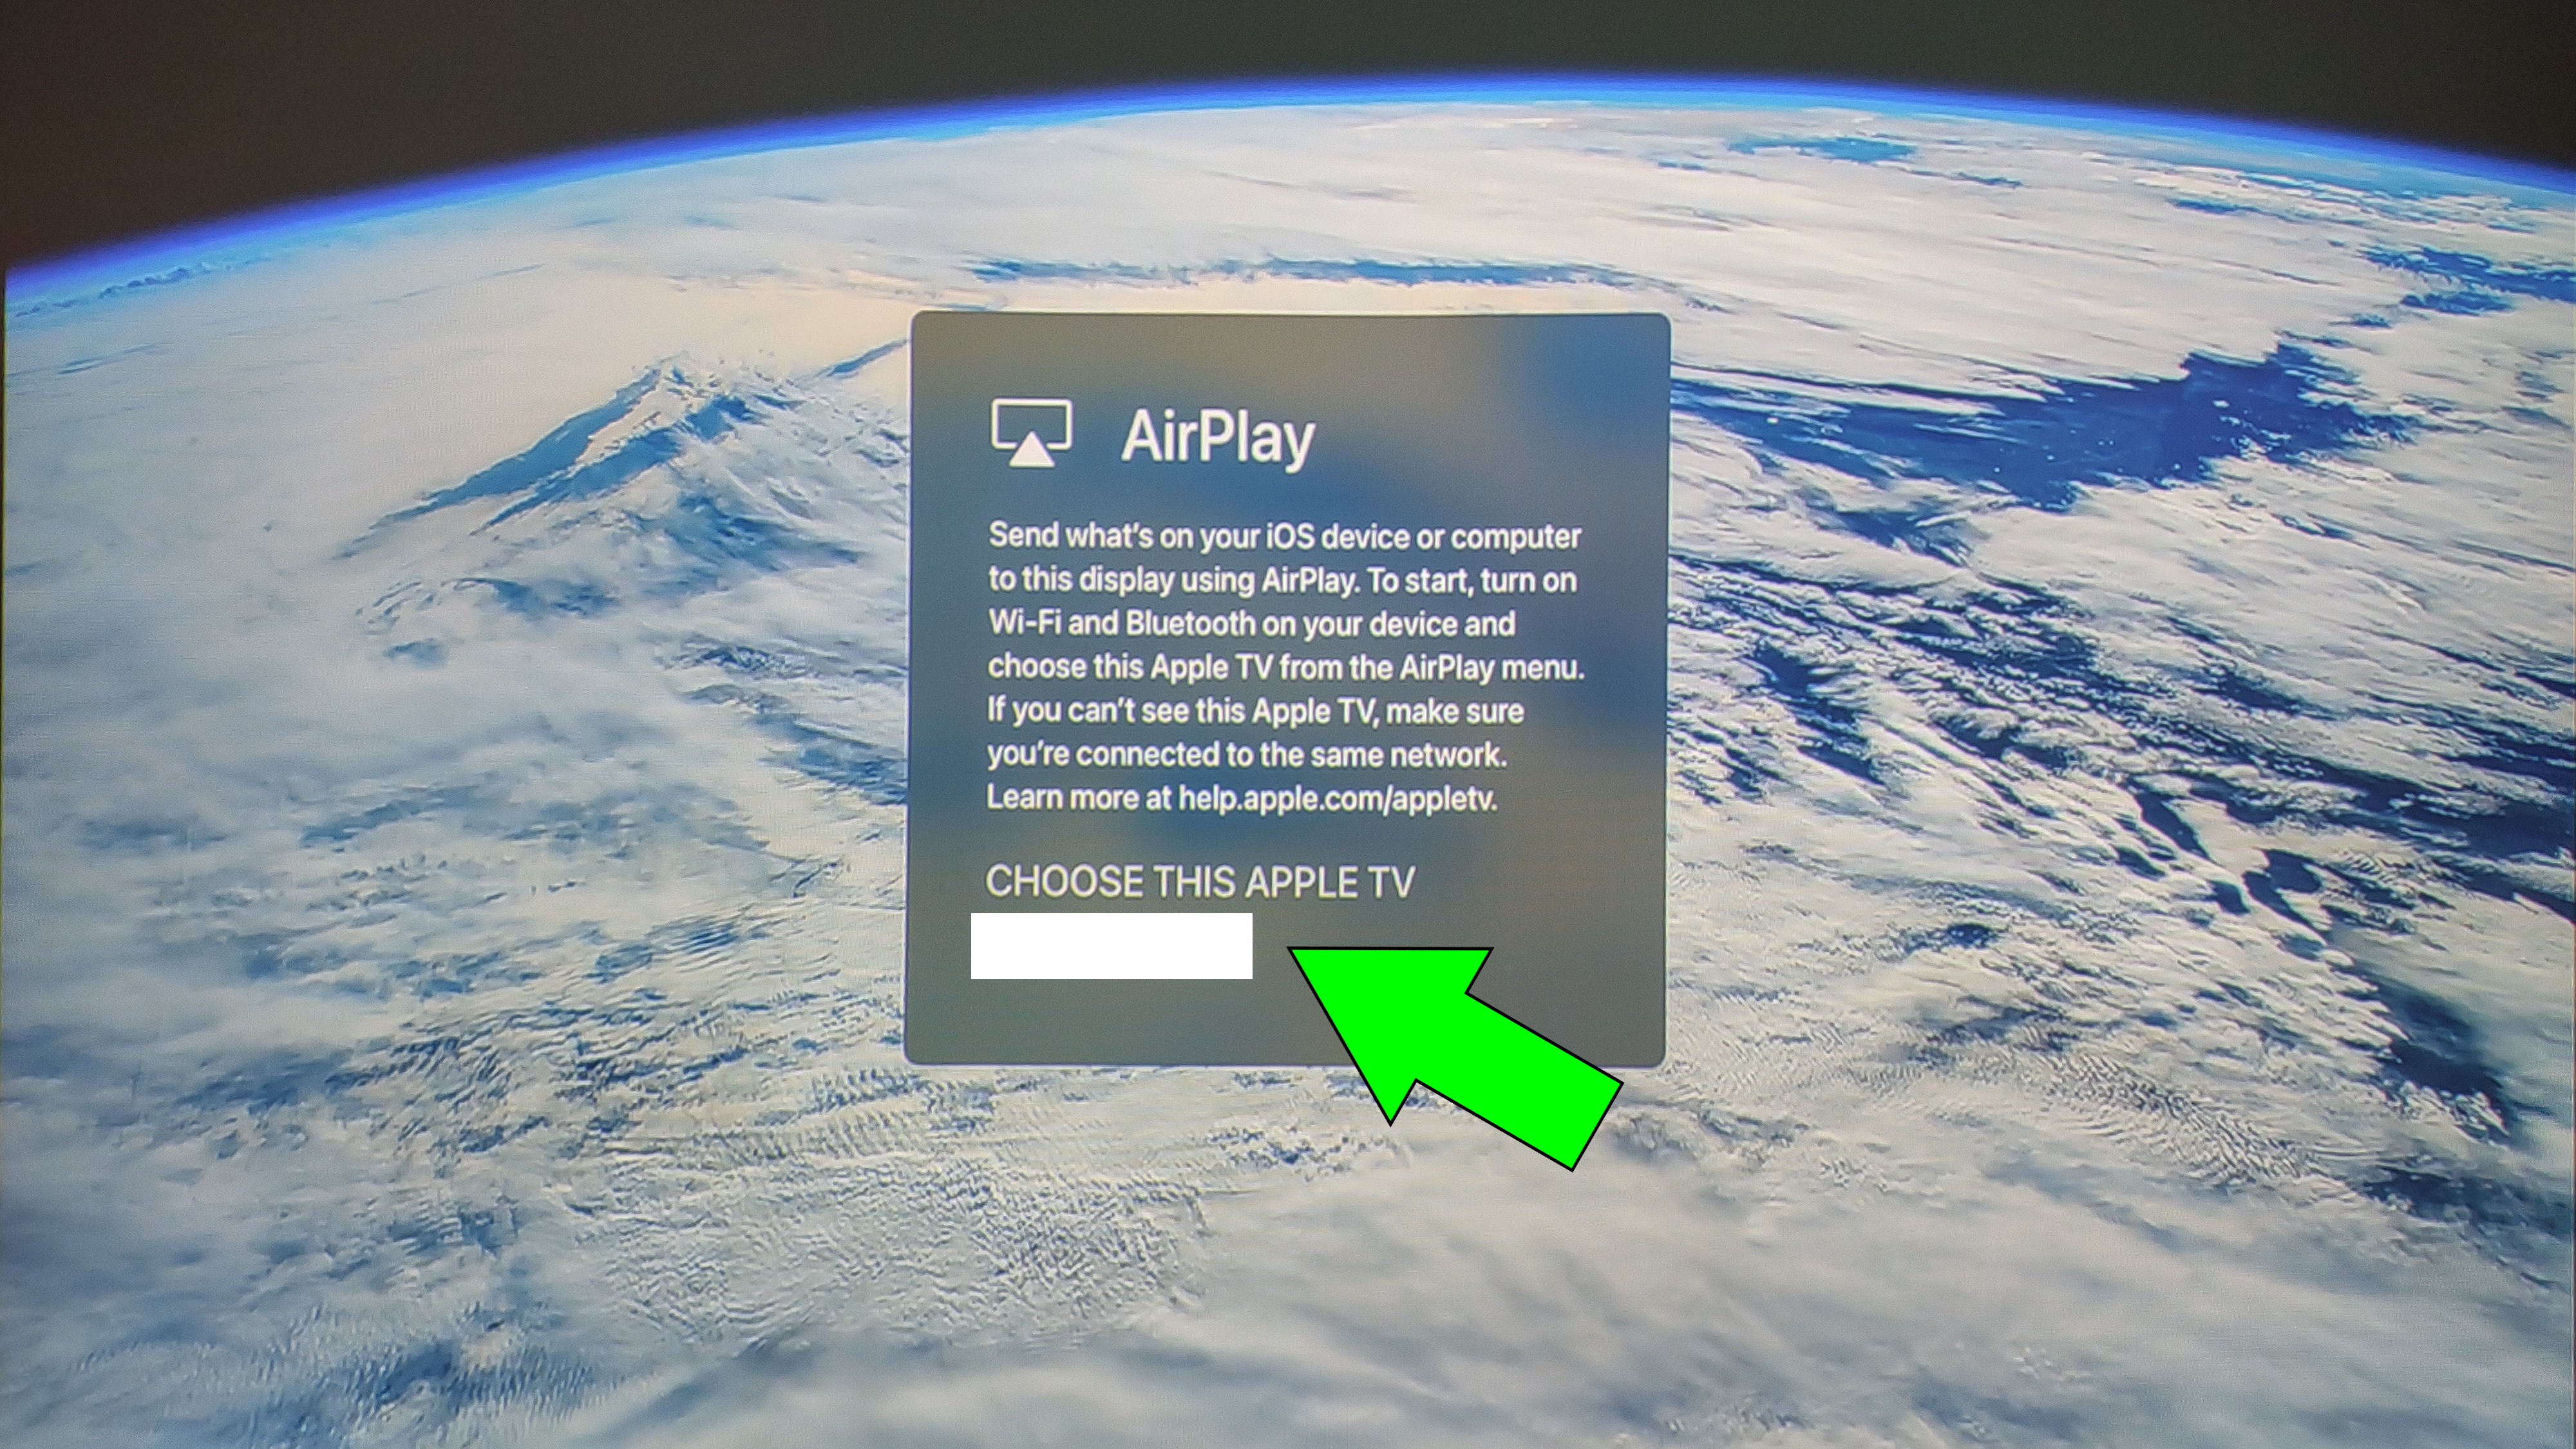 Using AirPlay to project your laptop's screen